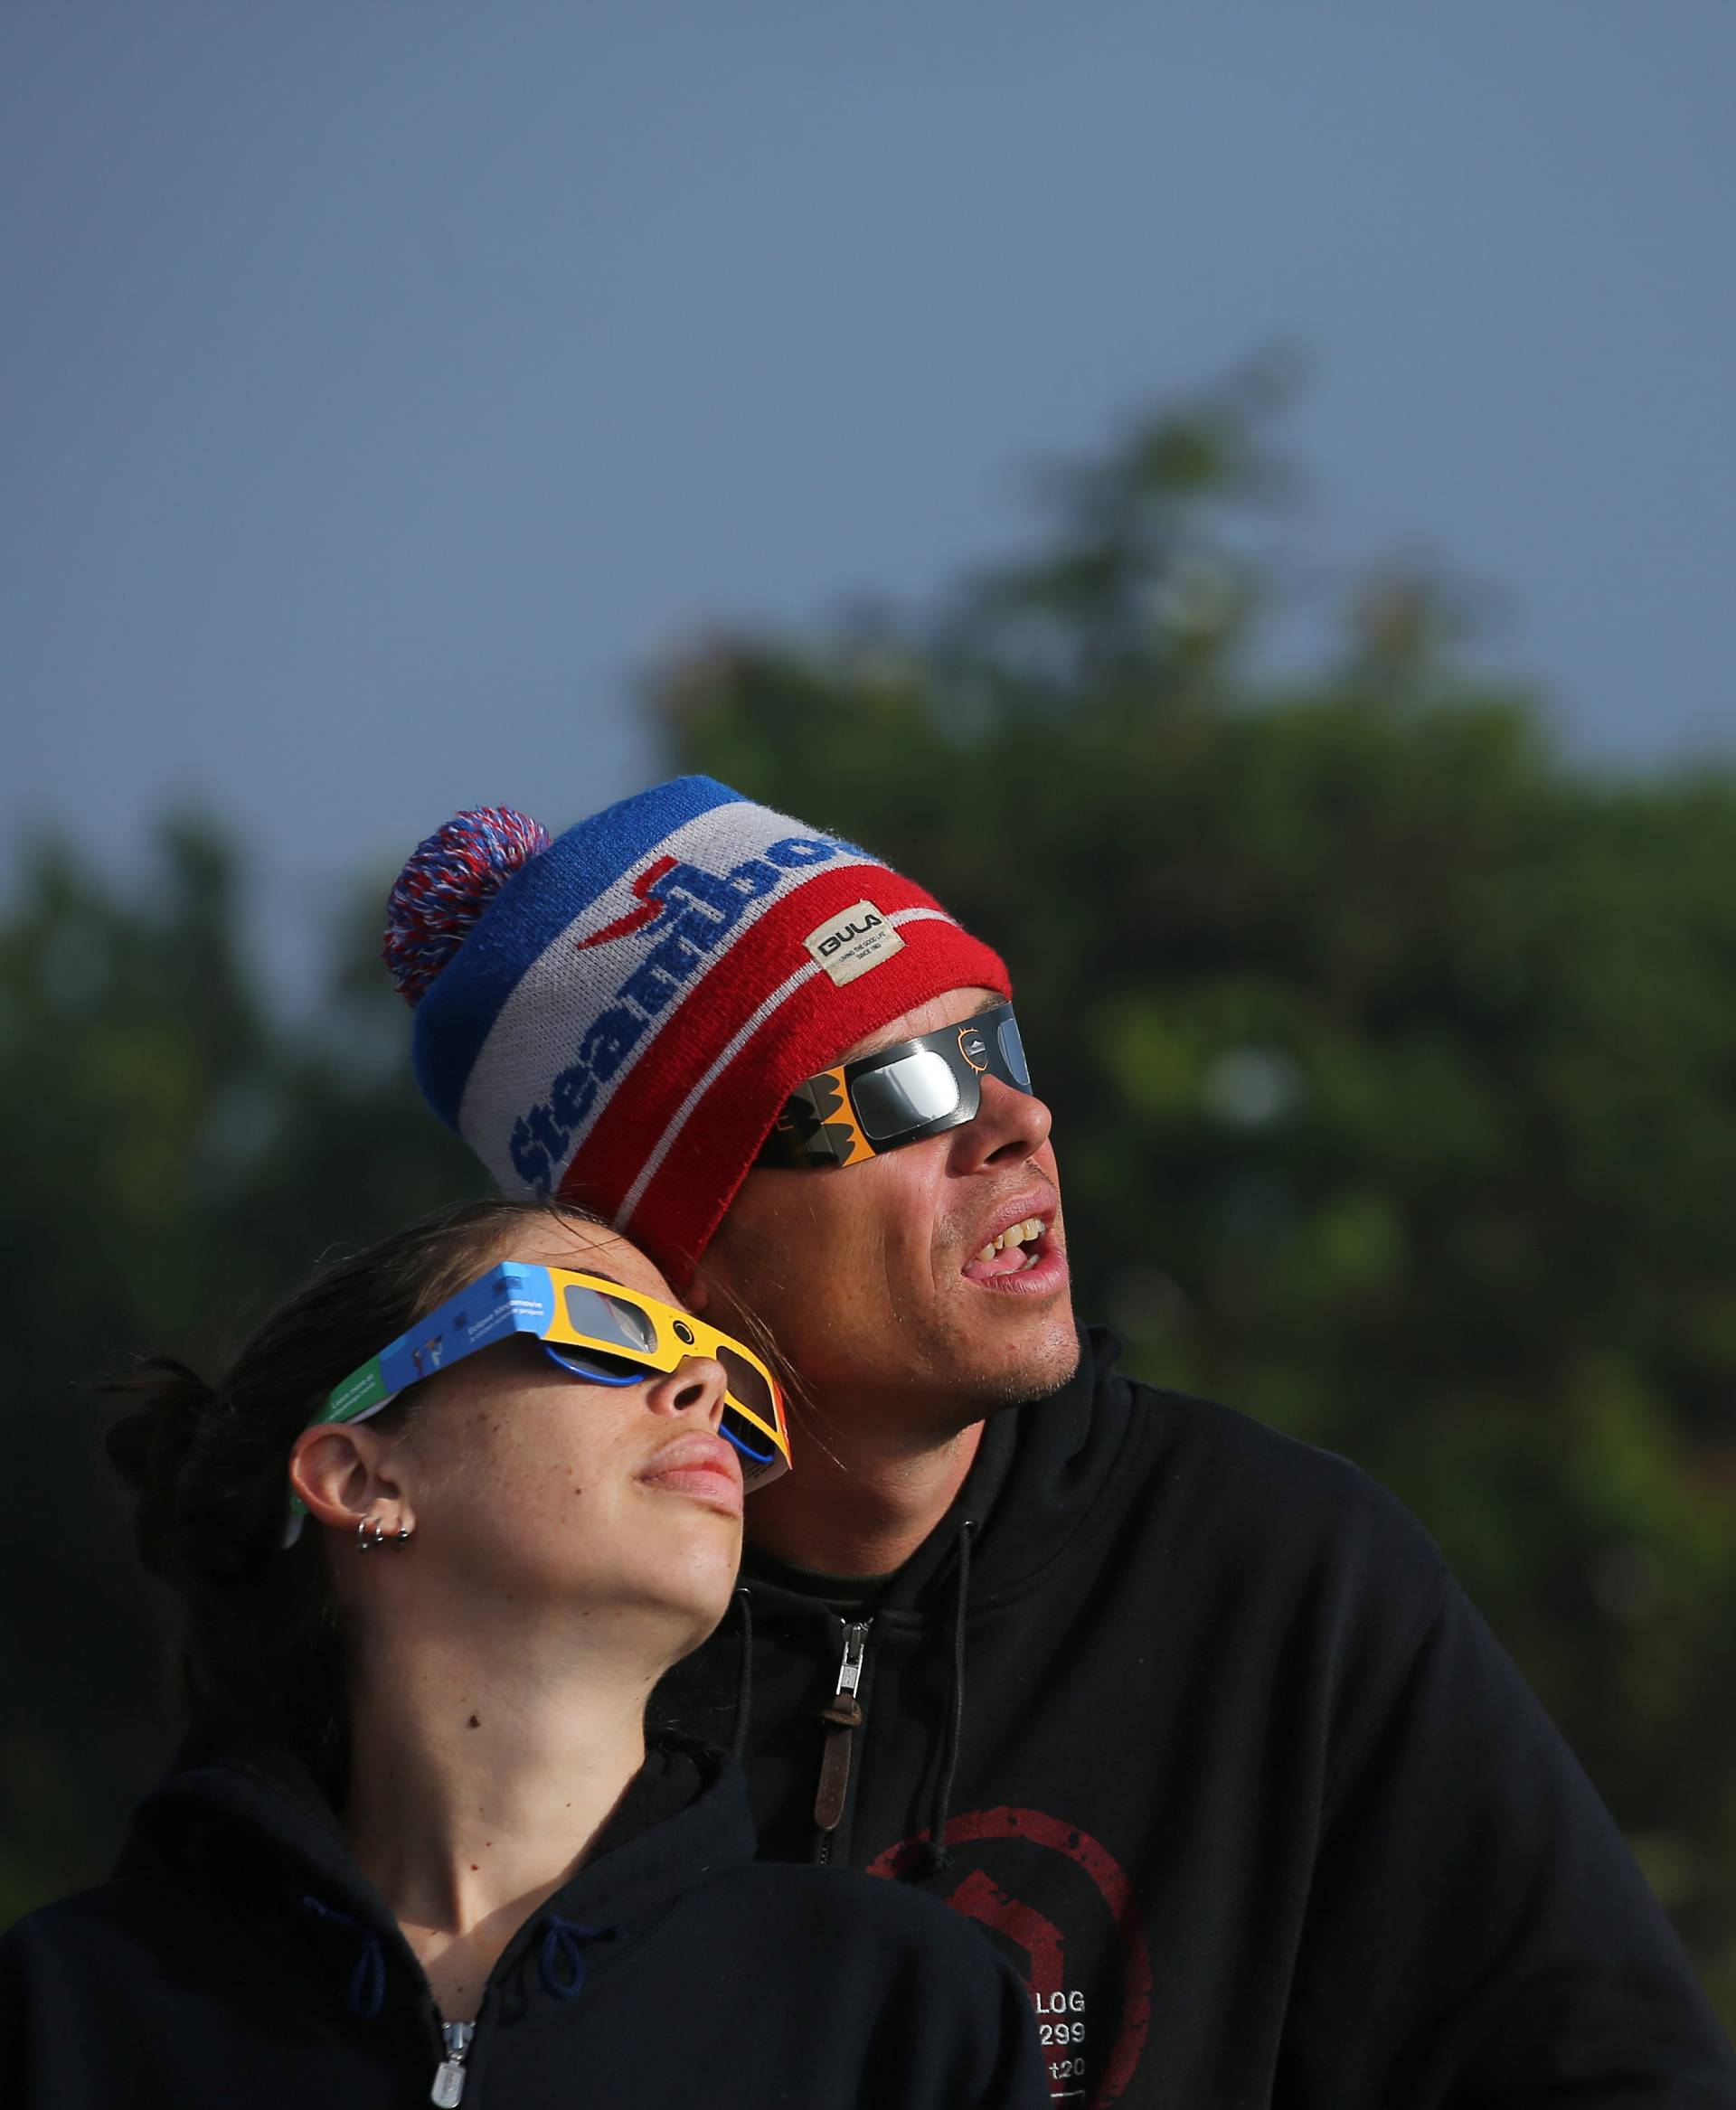 People try on solar viewing glasses as the sun emerges through fog cover before the solar eclipse in Depoe Bay